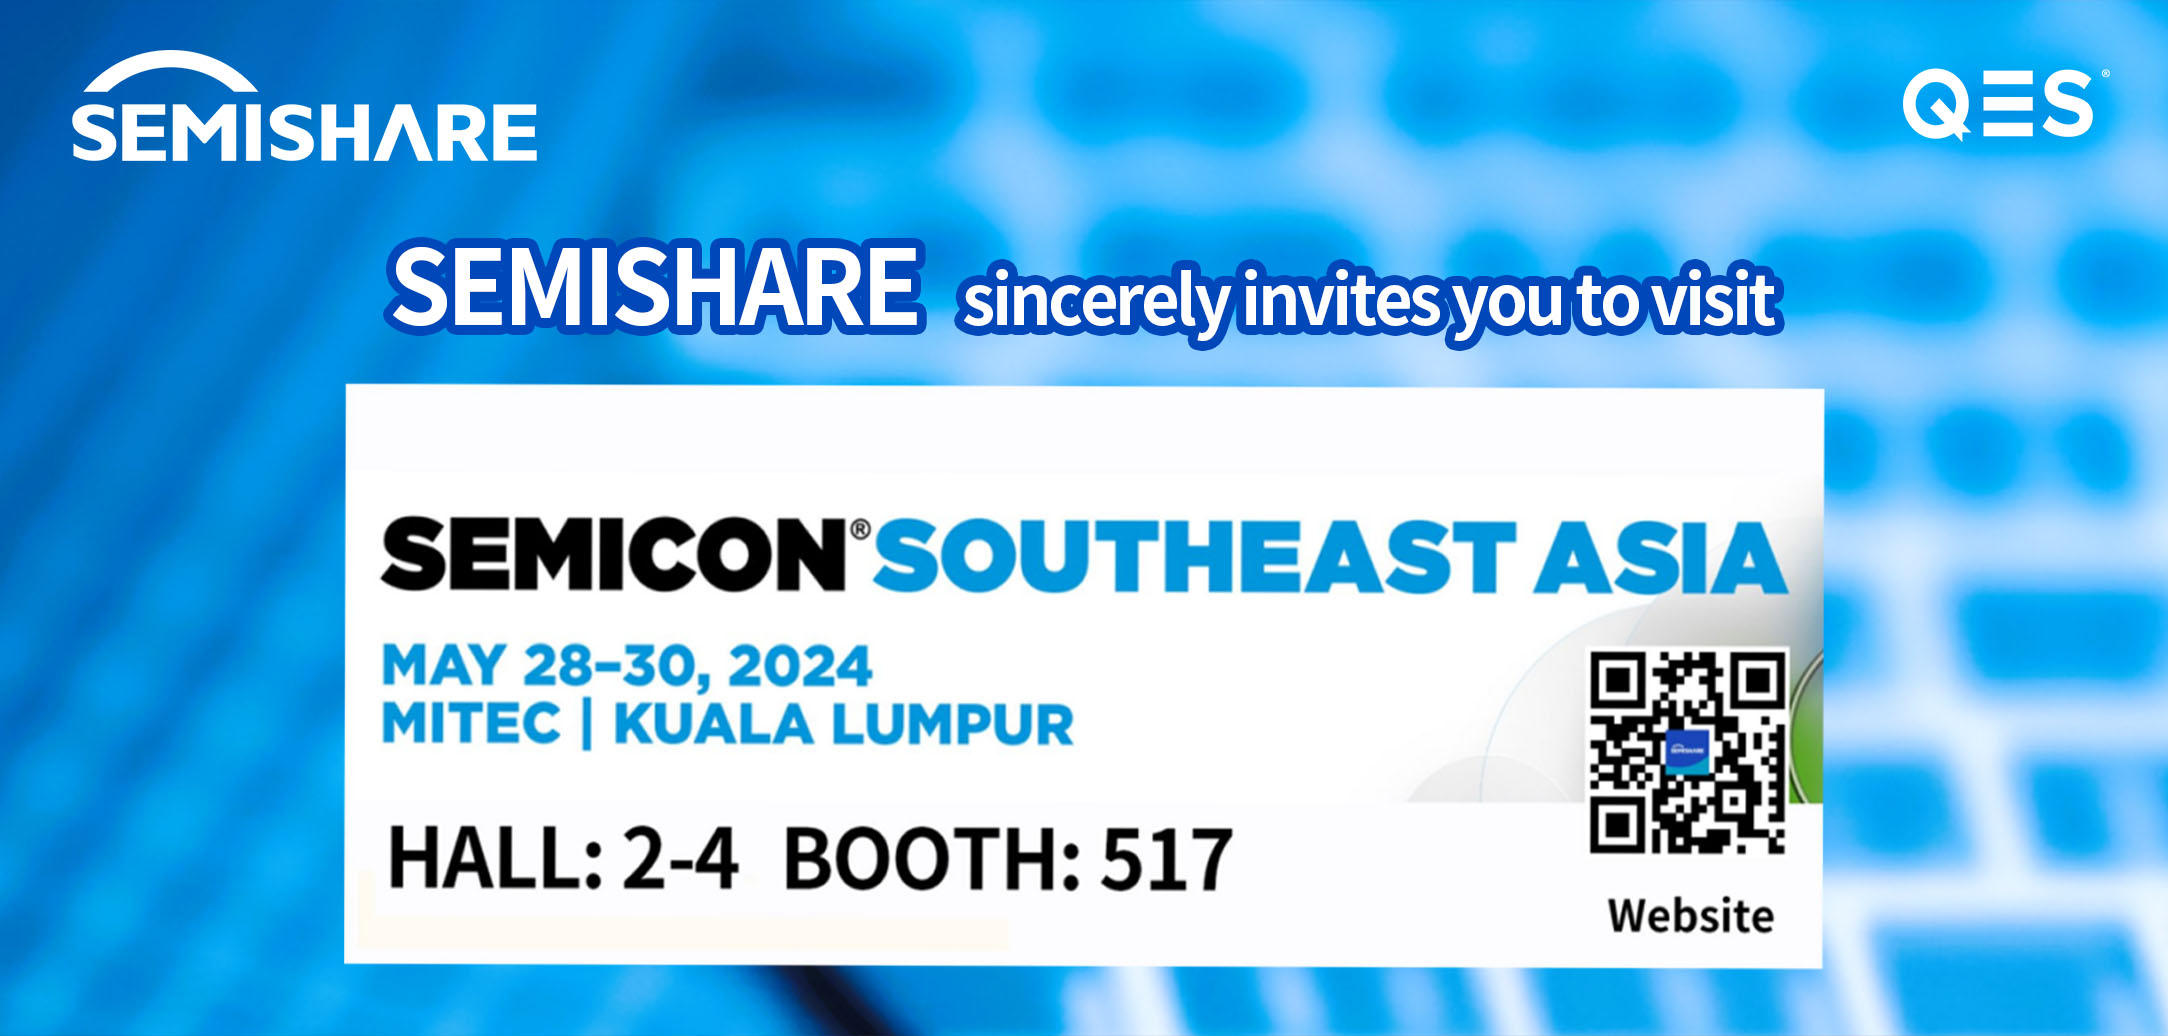 SEMISHARE Sincerely Invites You to visit us  in  Semicon Southeast Asia  2024